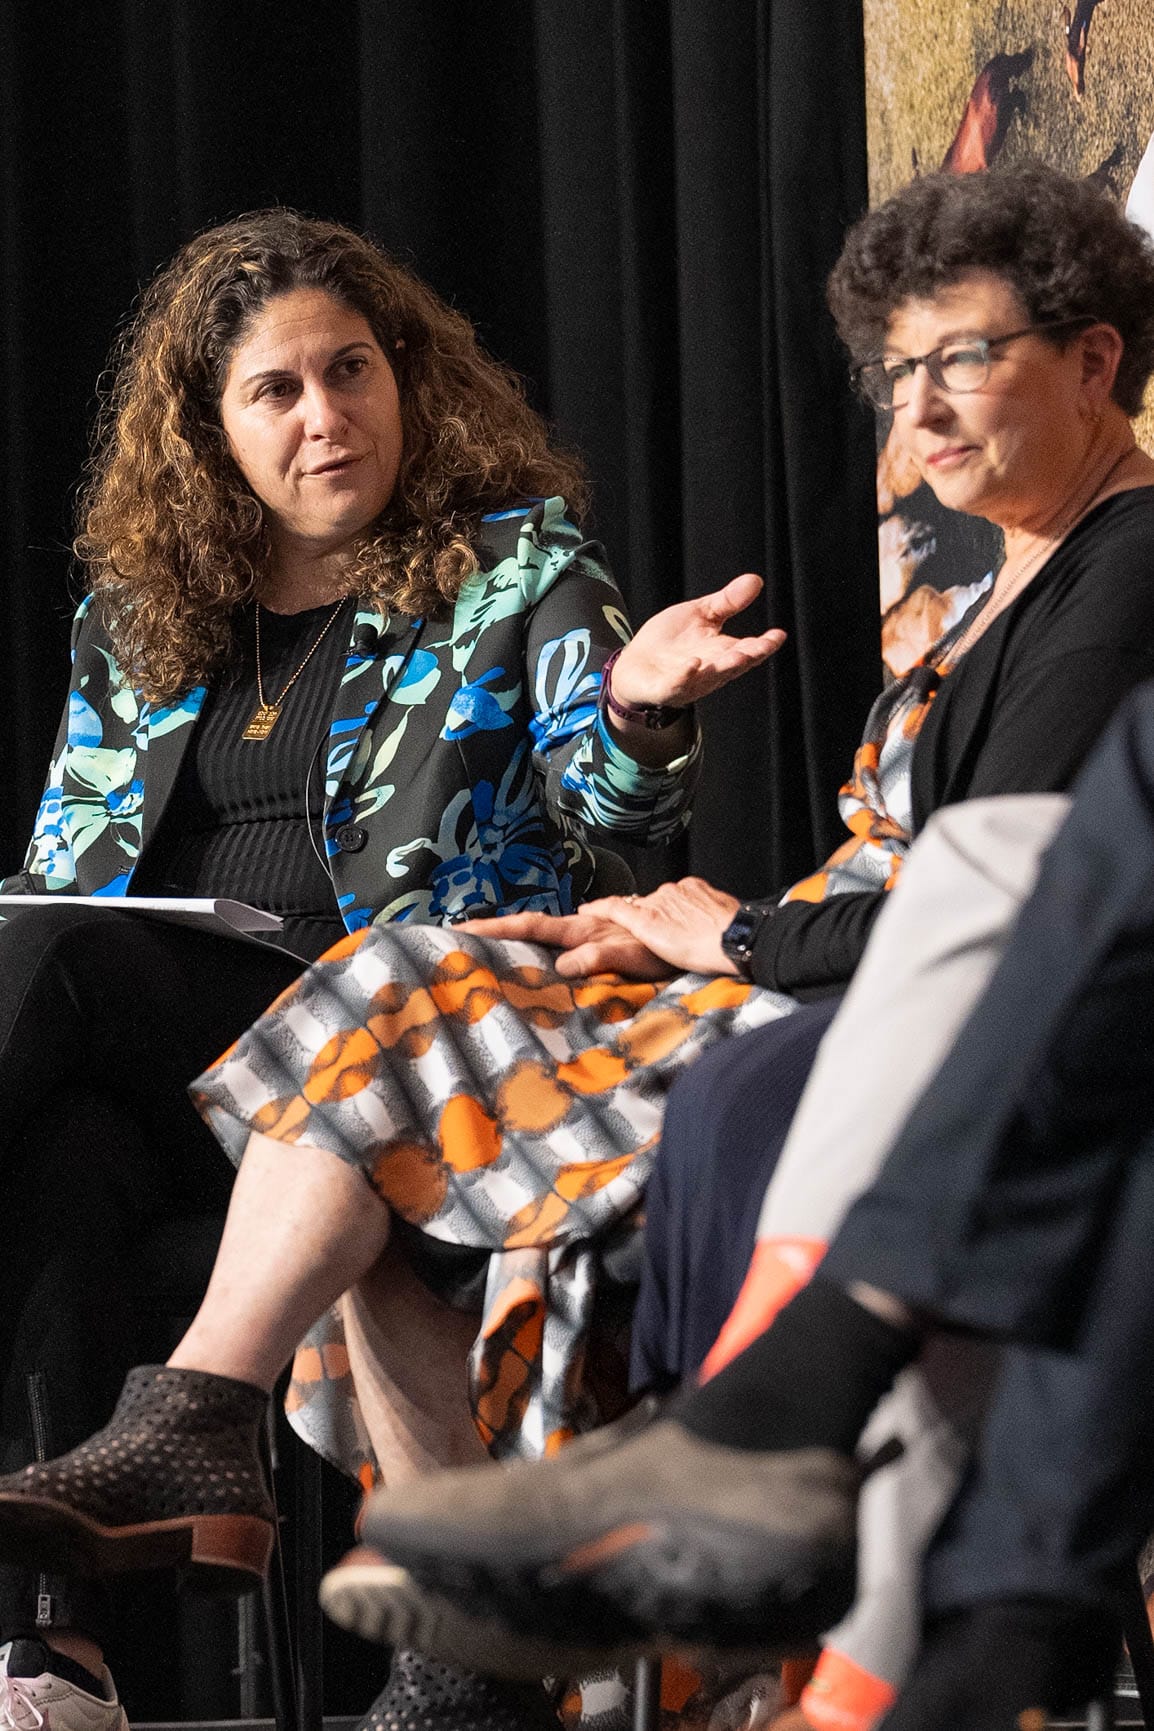 Invasive Species Corporation Co-Founder and Executive Chair Dr Pam Marrone on stage at evoke<sup>AG.</sup>